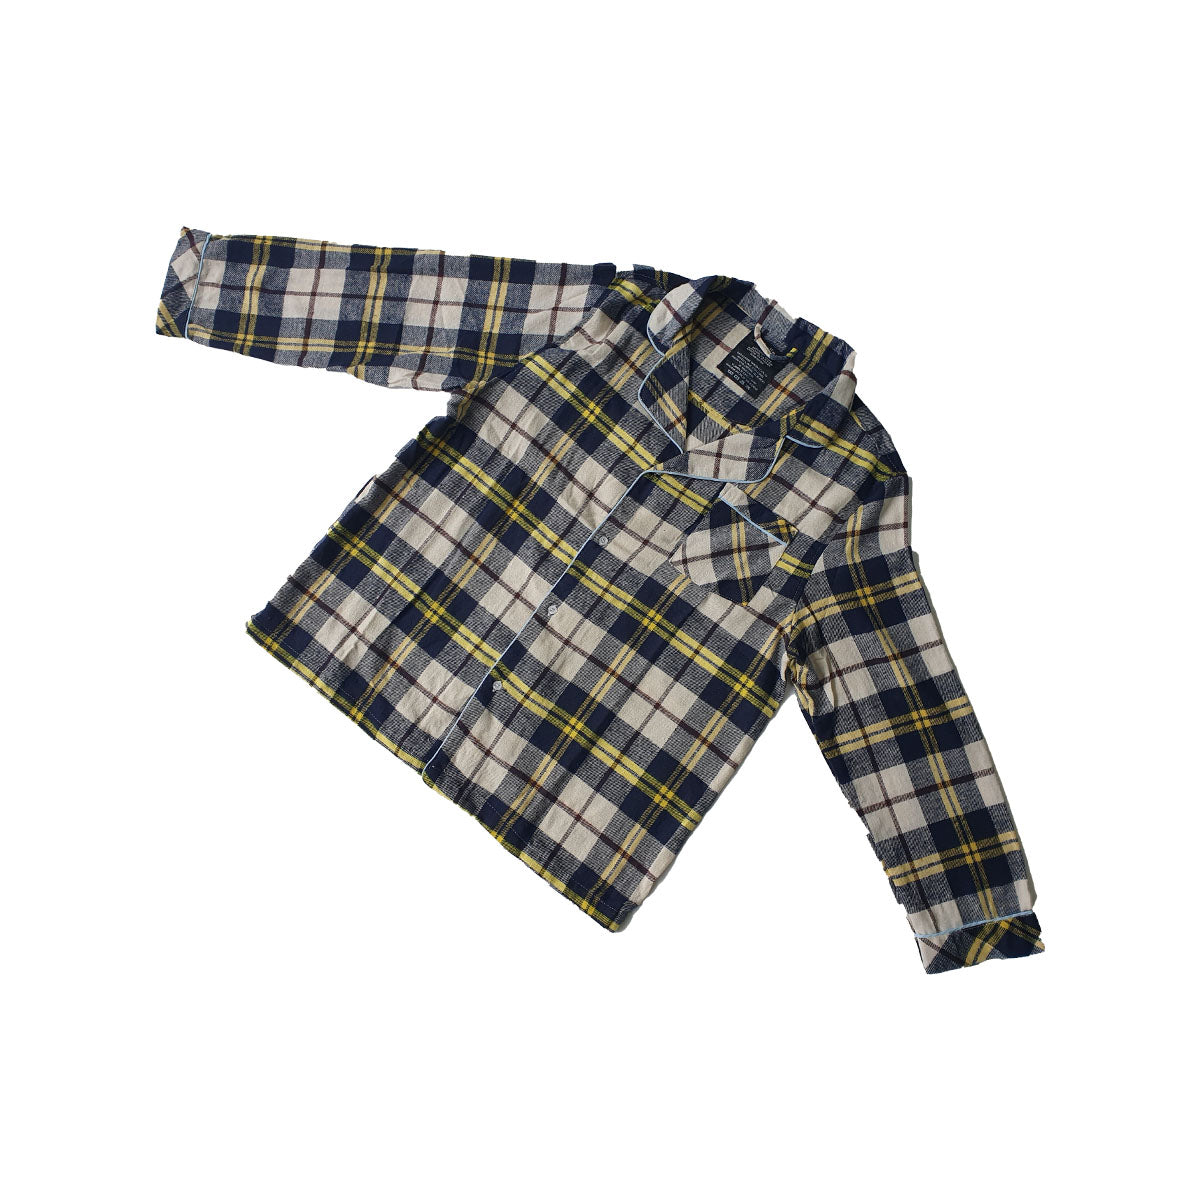 Flannel PJ's - Navy/Yellow/Natural